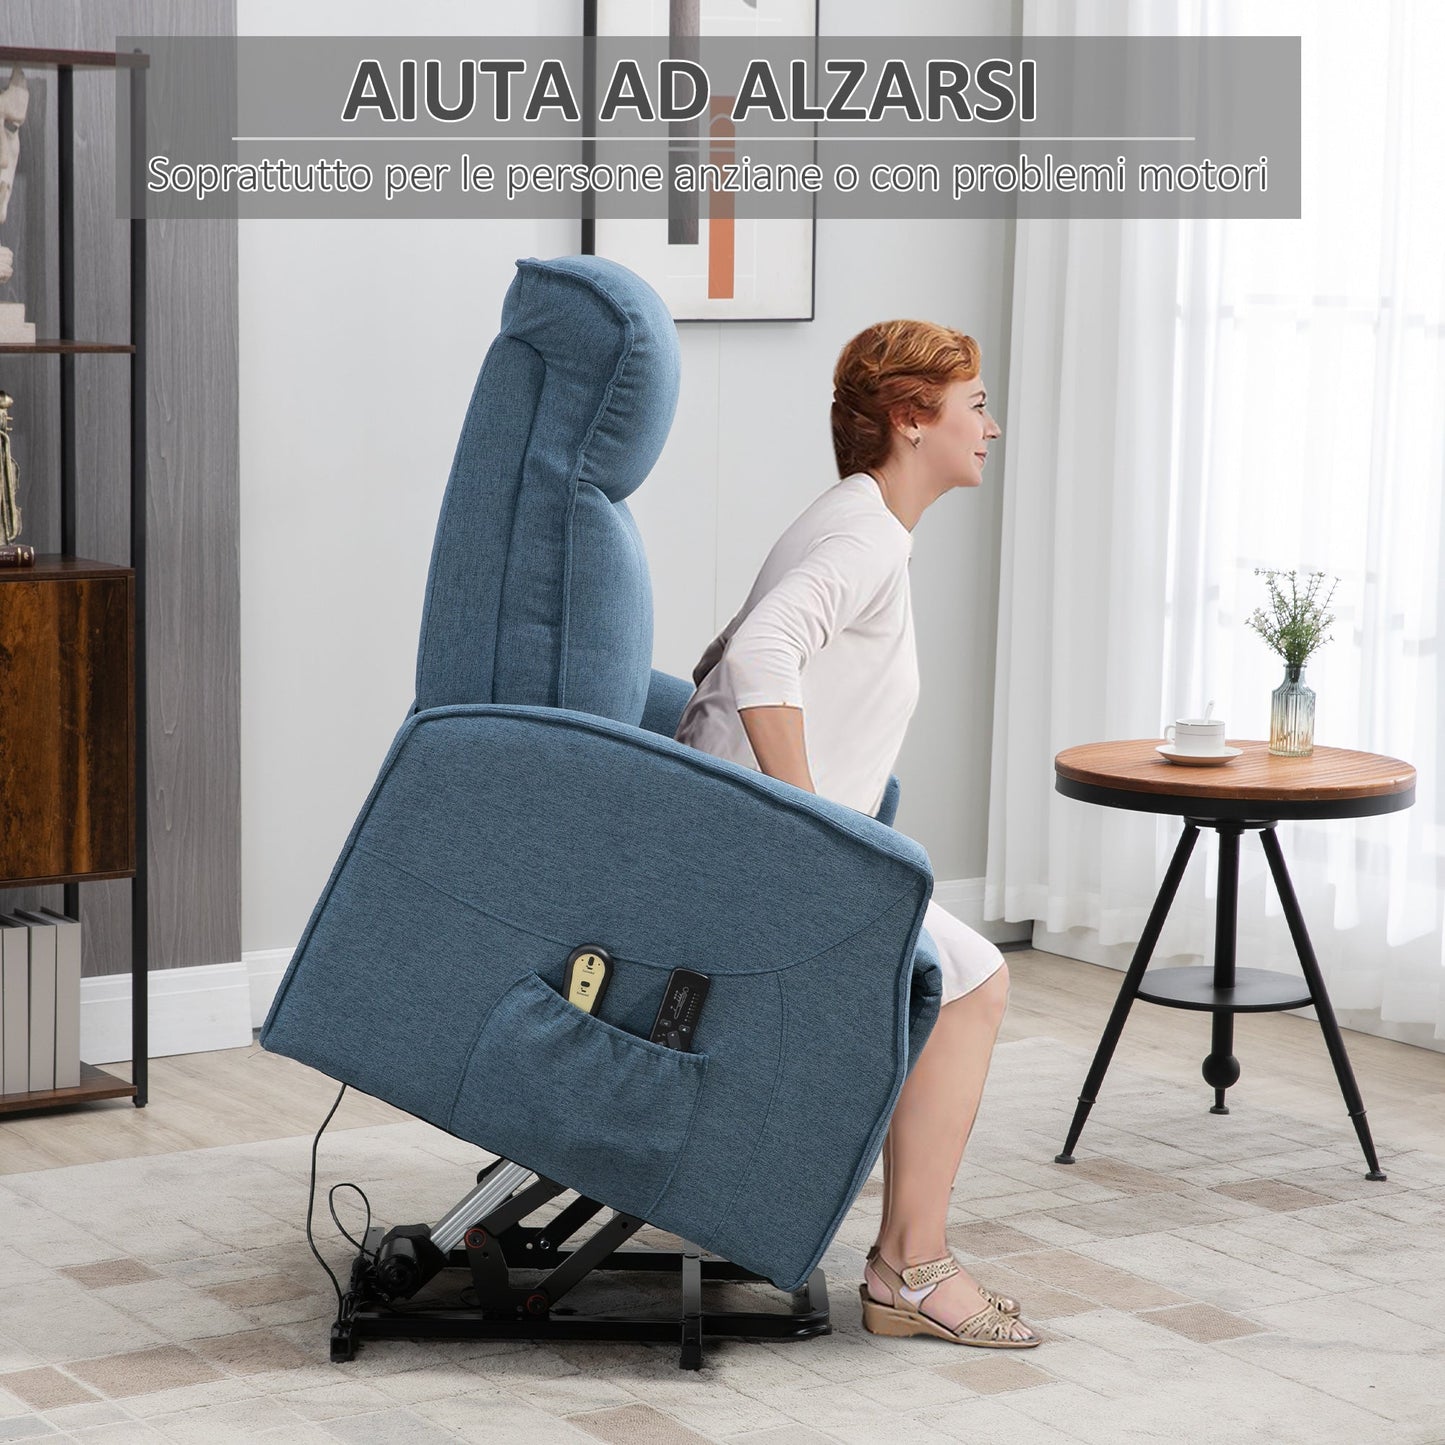 armchair relaxation with 8 massage points, reclination at 135 ° and 2 remote controls, blue